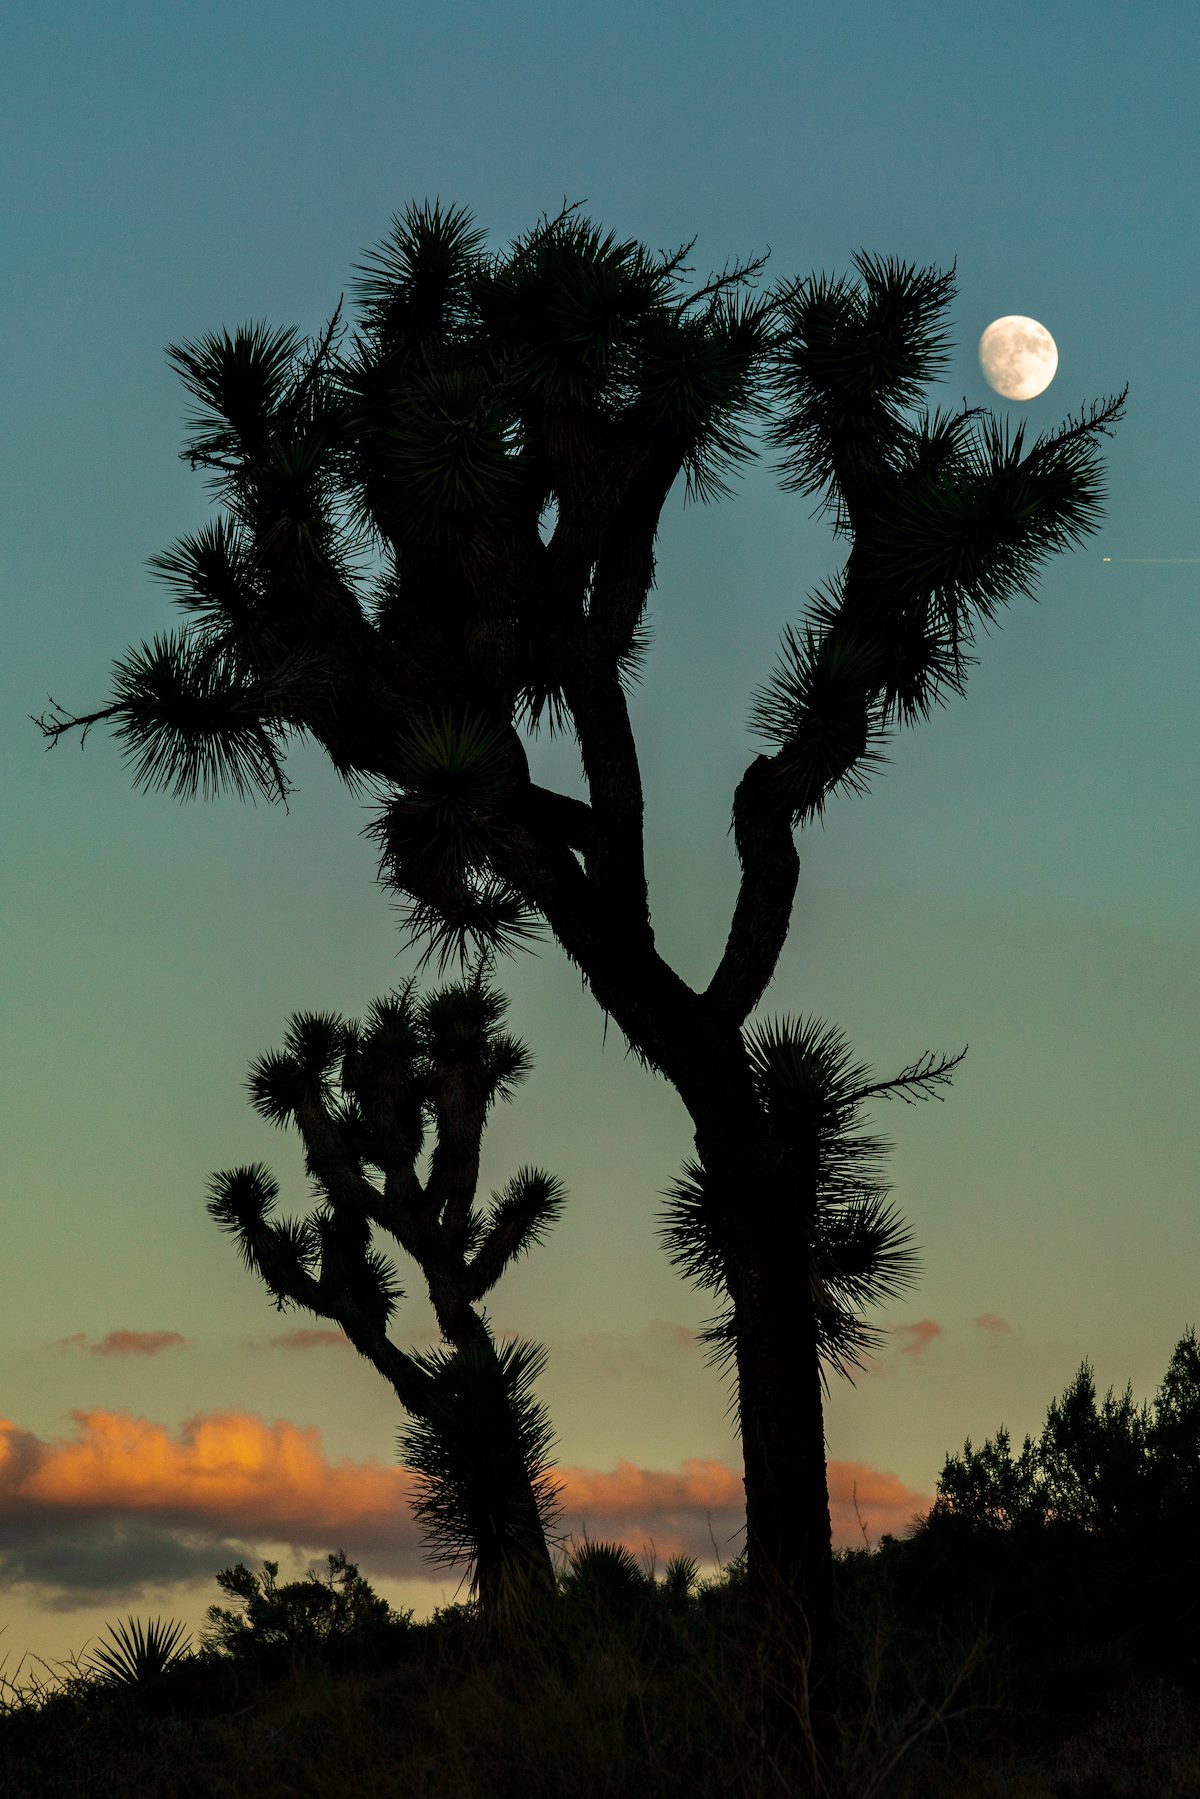 2018 October Joshua Tree and Moon from the Black Rock Canyon Trail in Joshua Tree National Park